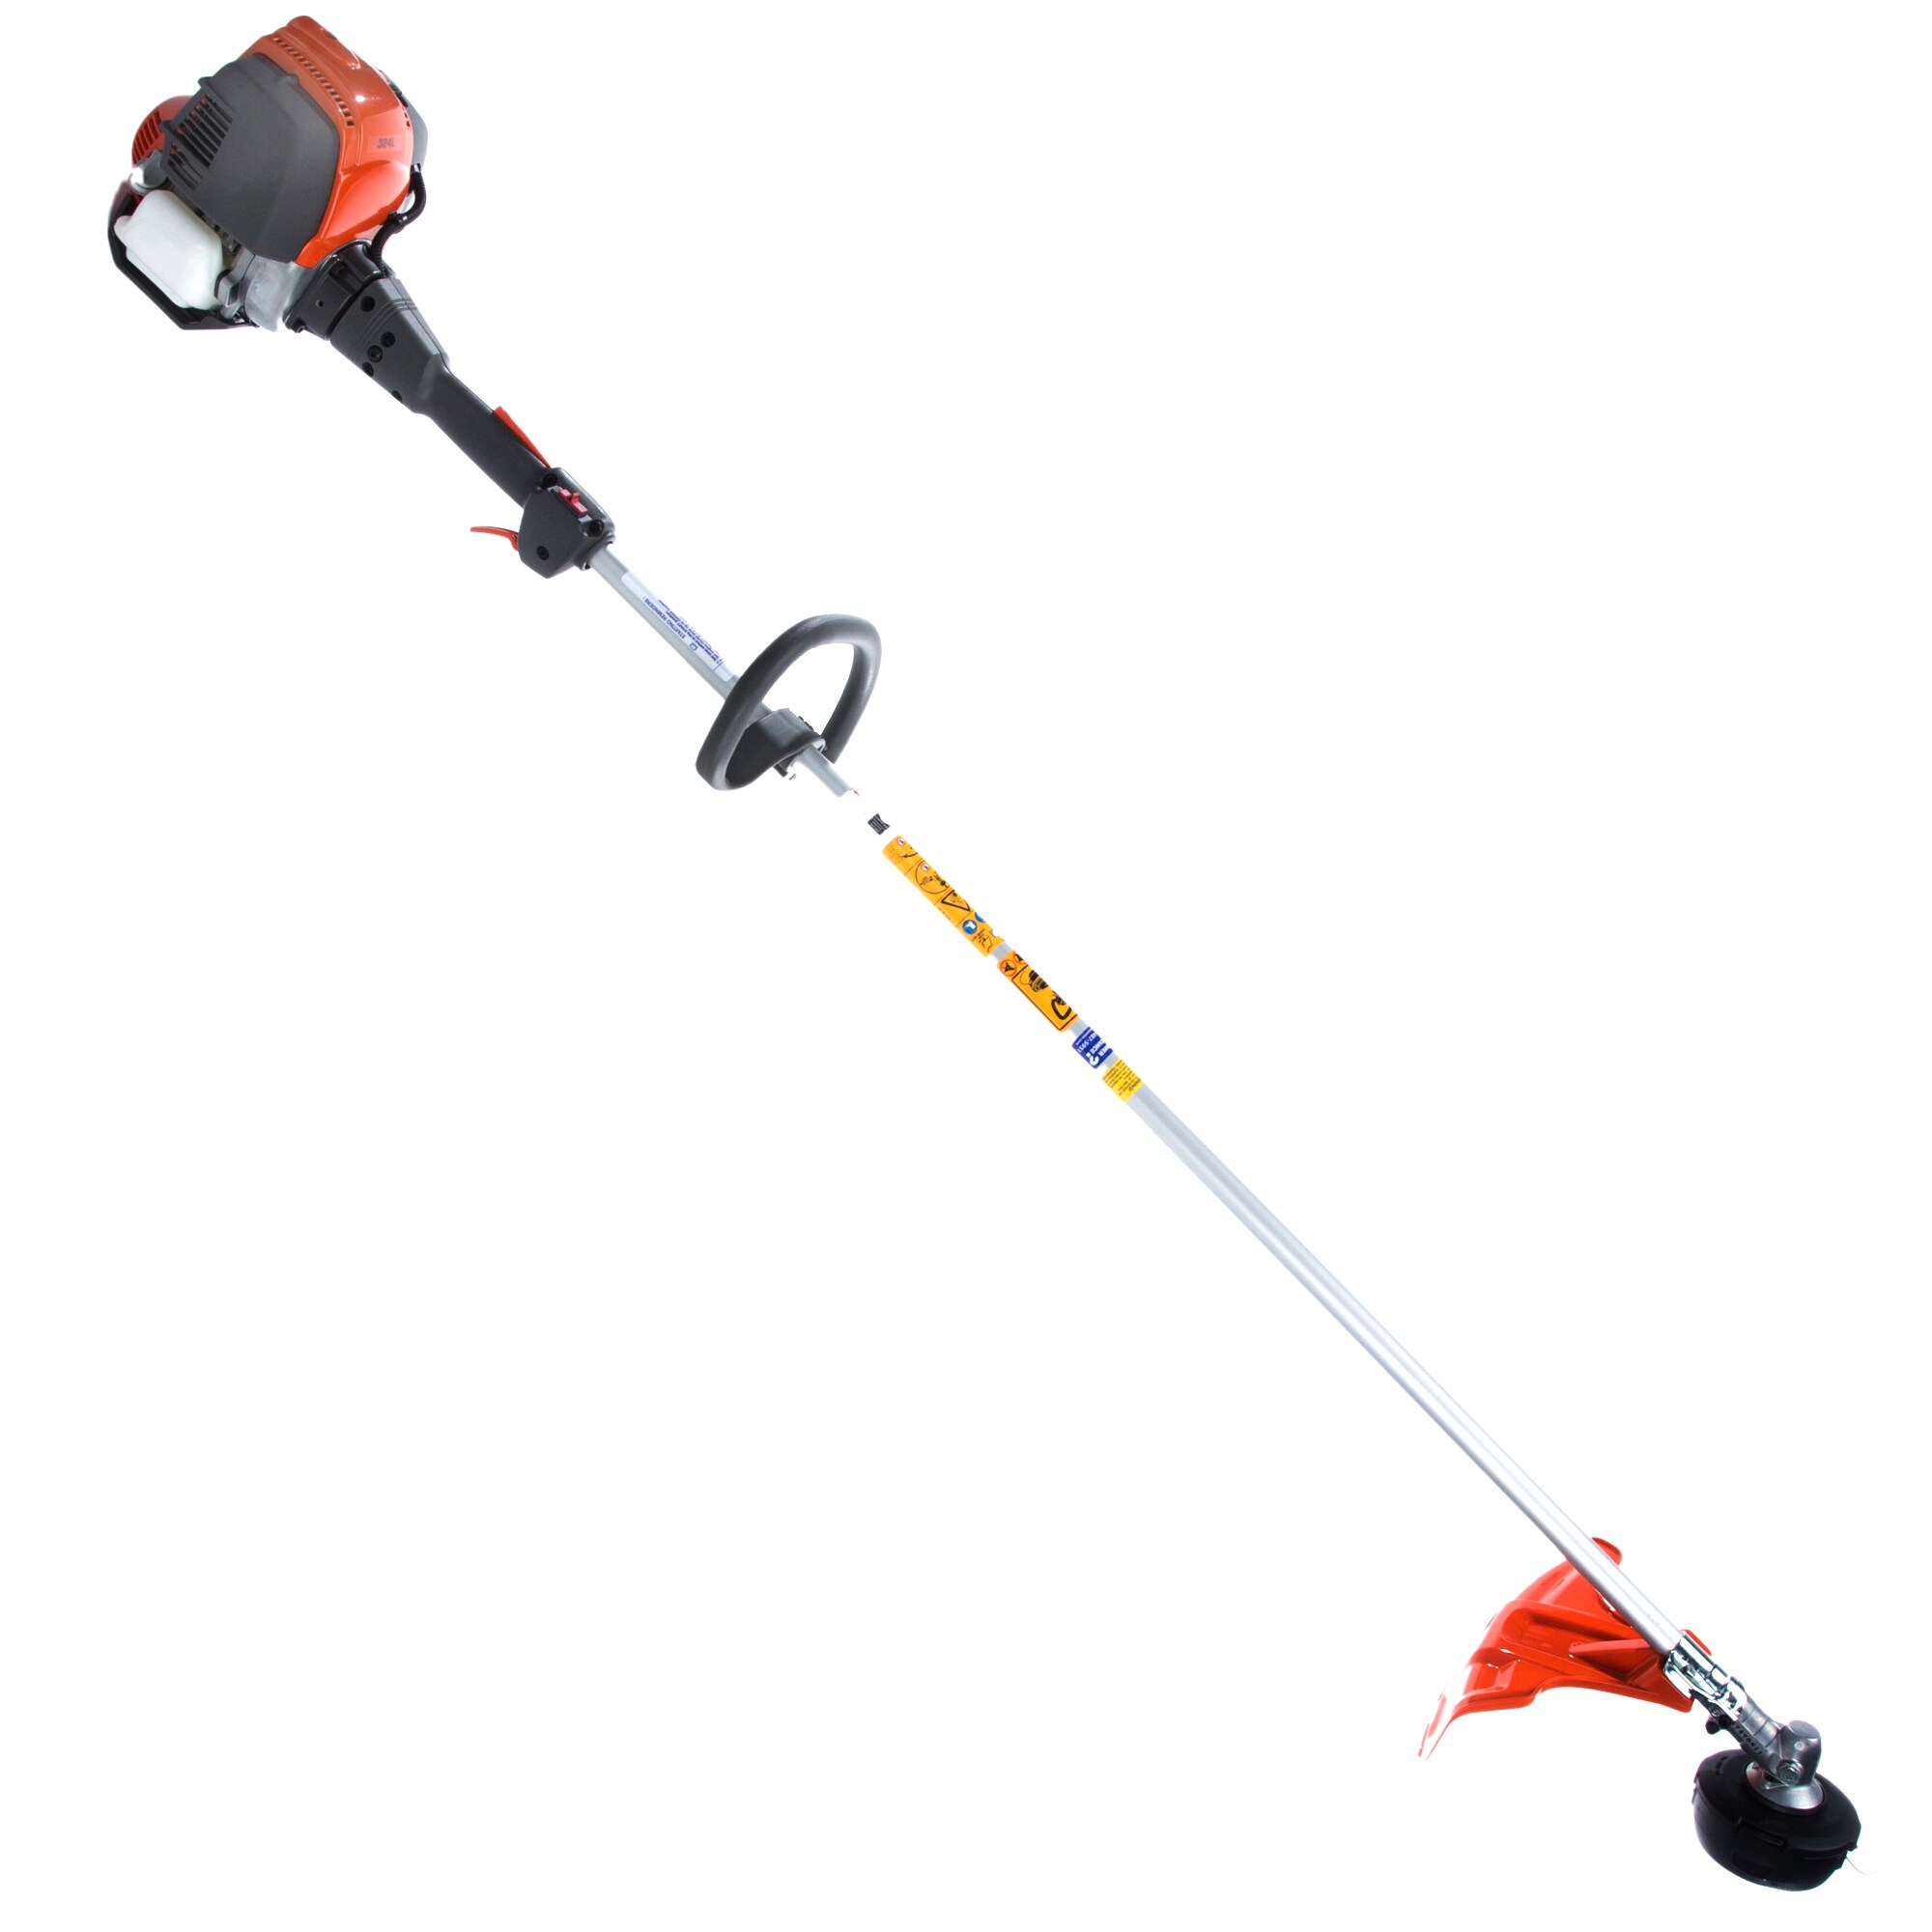 Husqvarna 324L 25cc 4Cycle 18in Straight Shaft Gas String Trimmer in